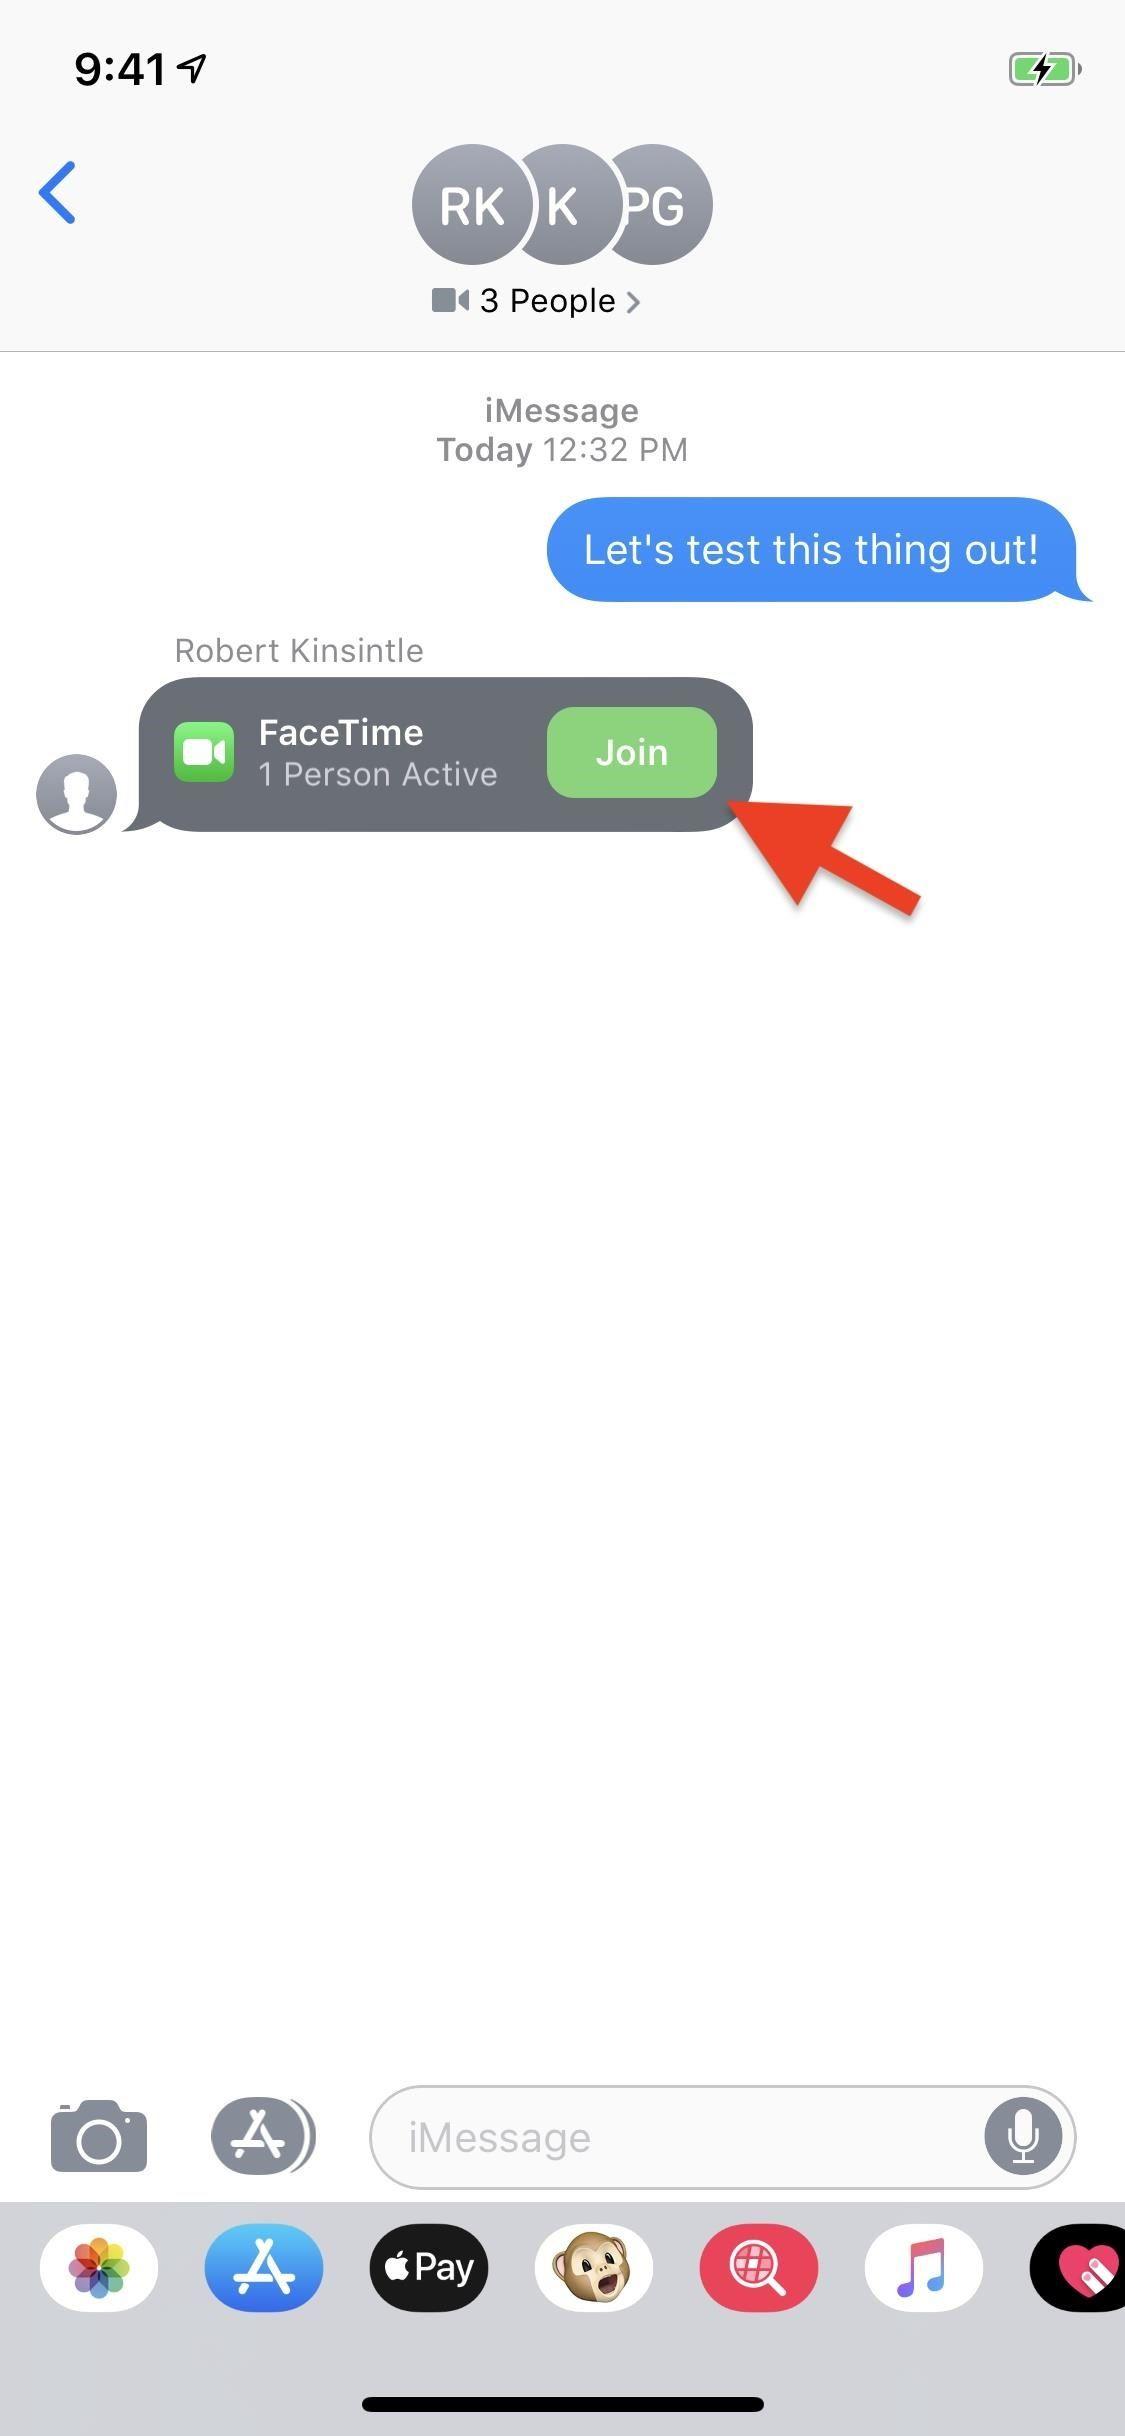 FaceTime App Logo - How to Use FaceTime's Group Chat on Your iPhone to Talk to More Than